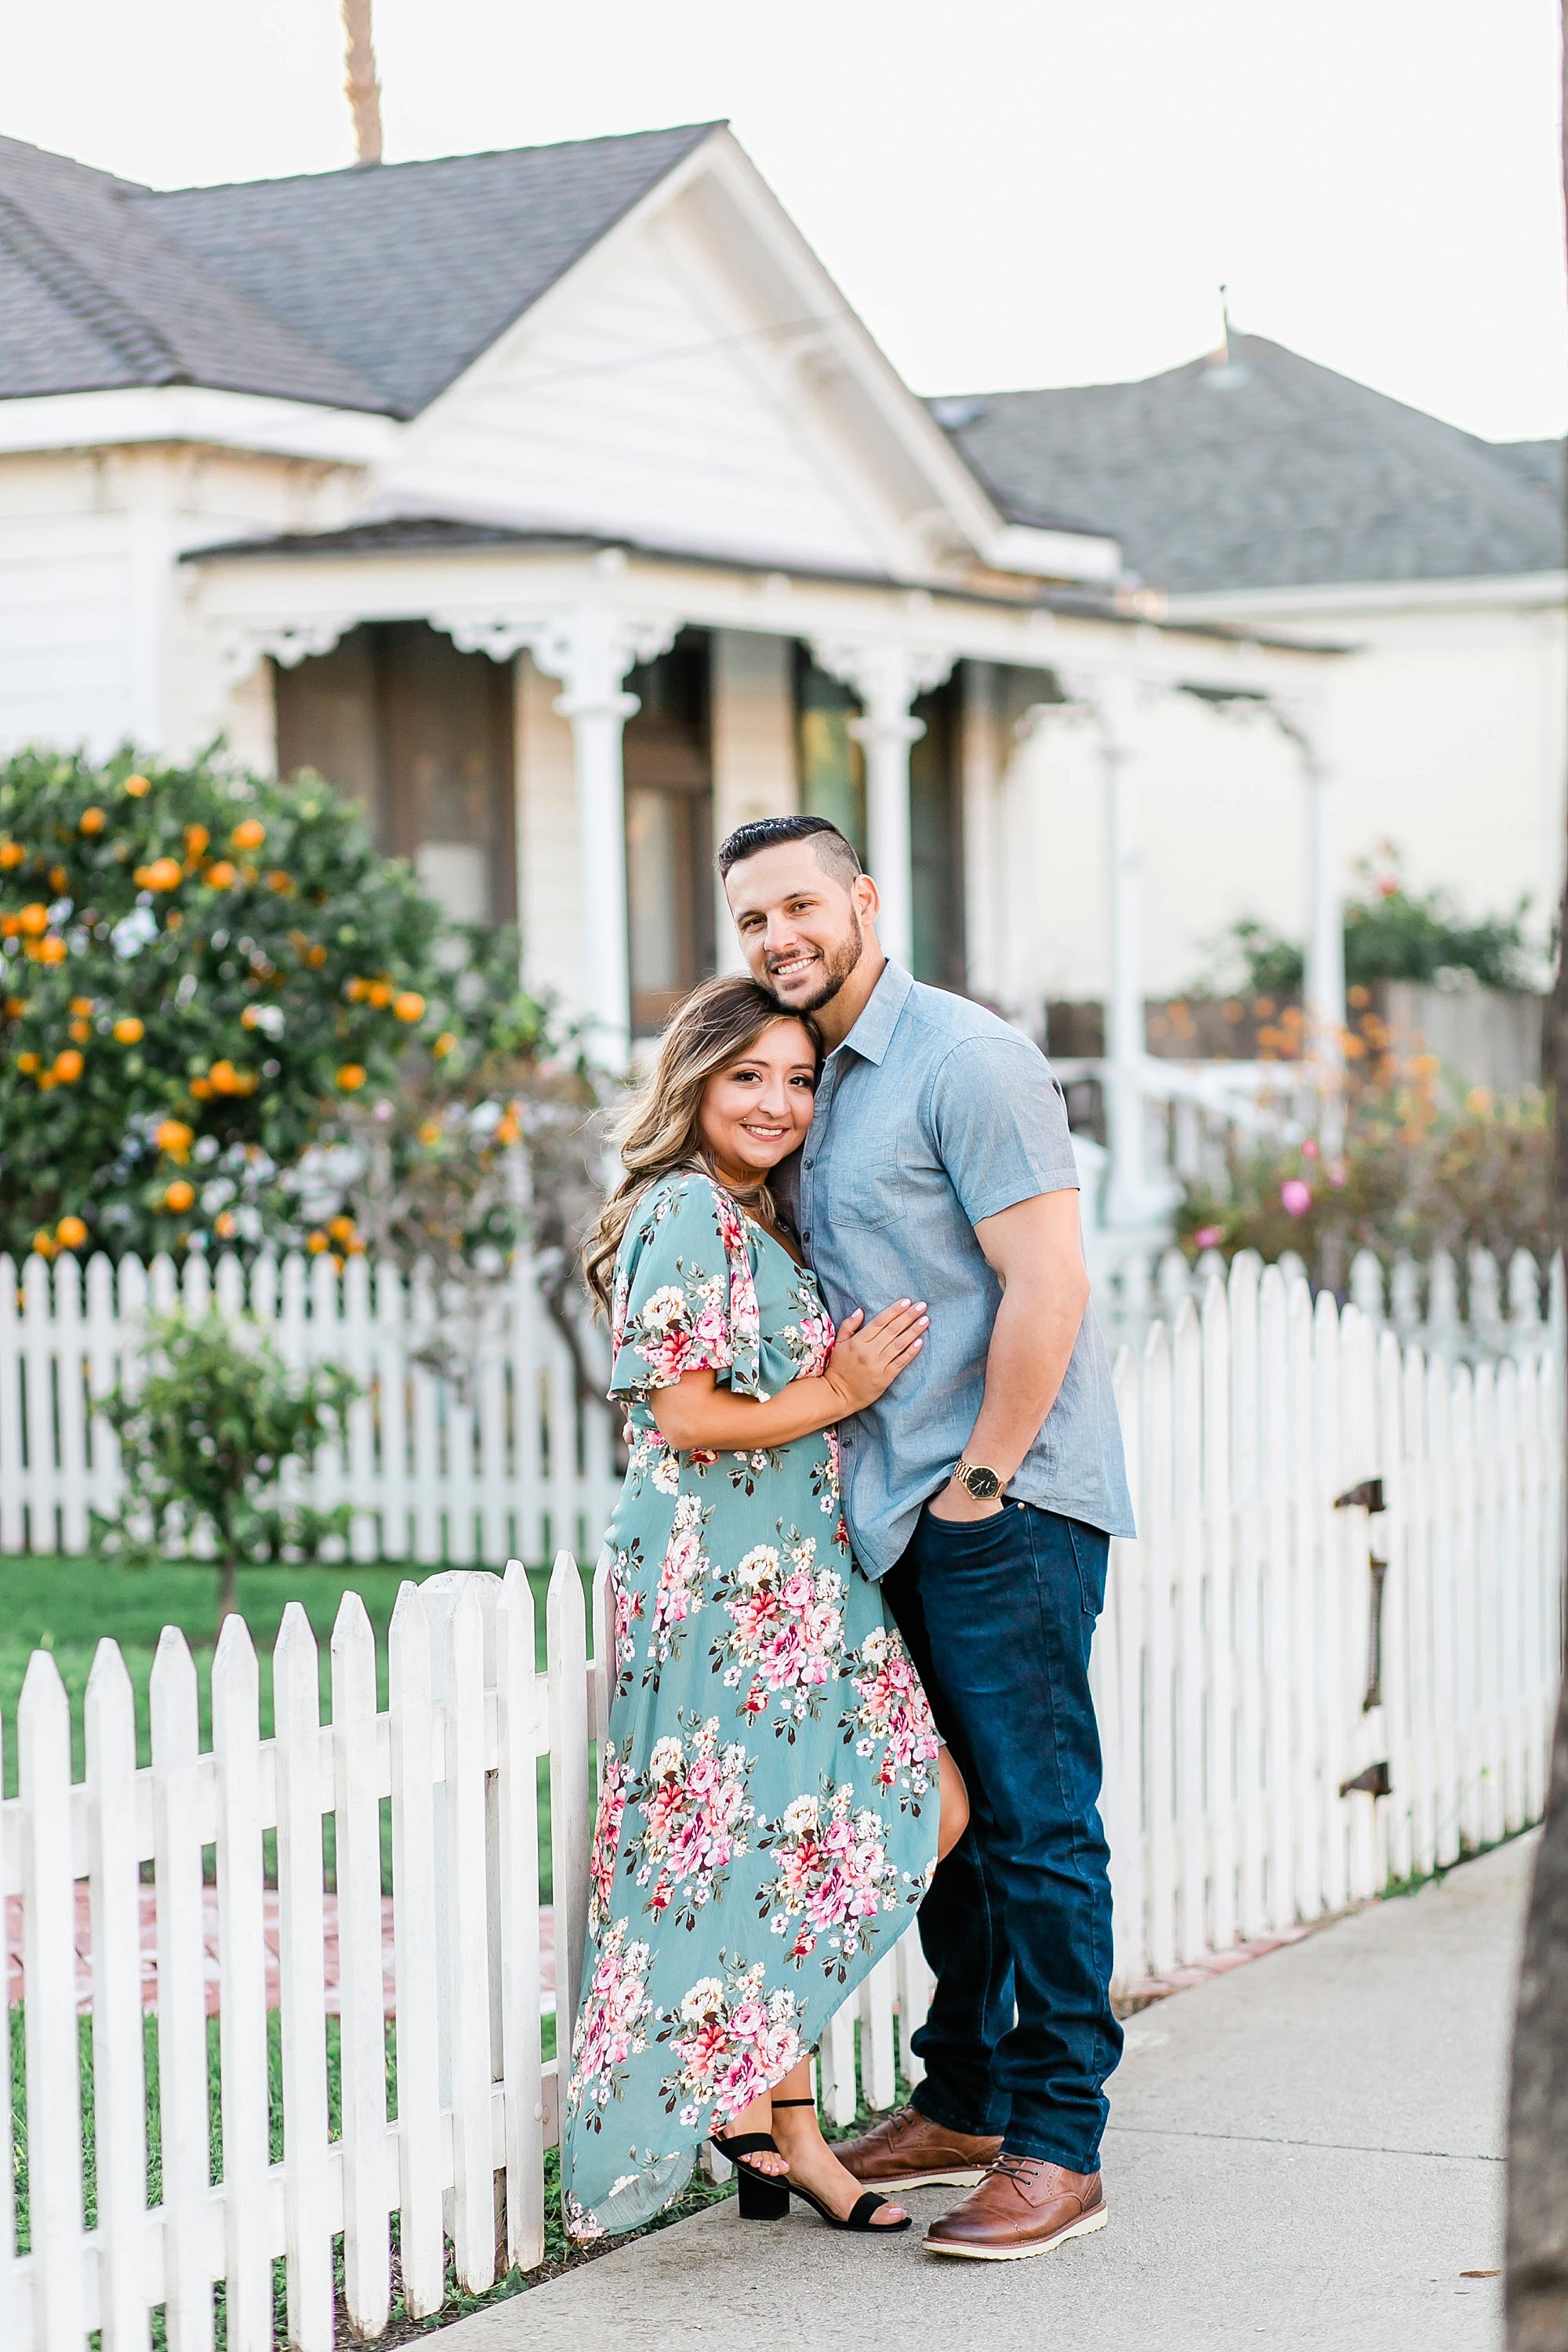  newly engaged couple embracing in front of the white picket fence 